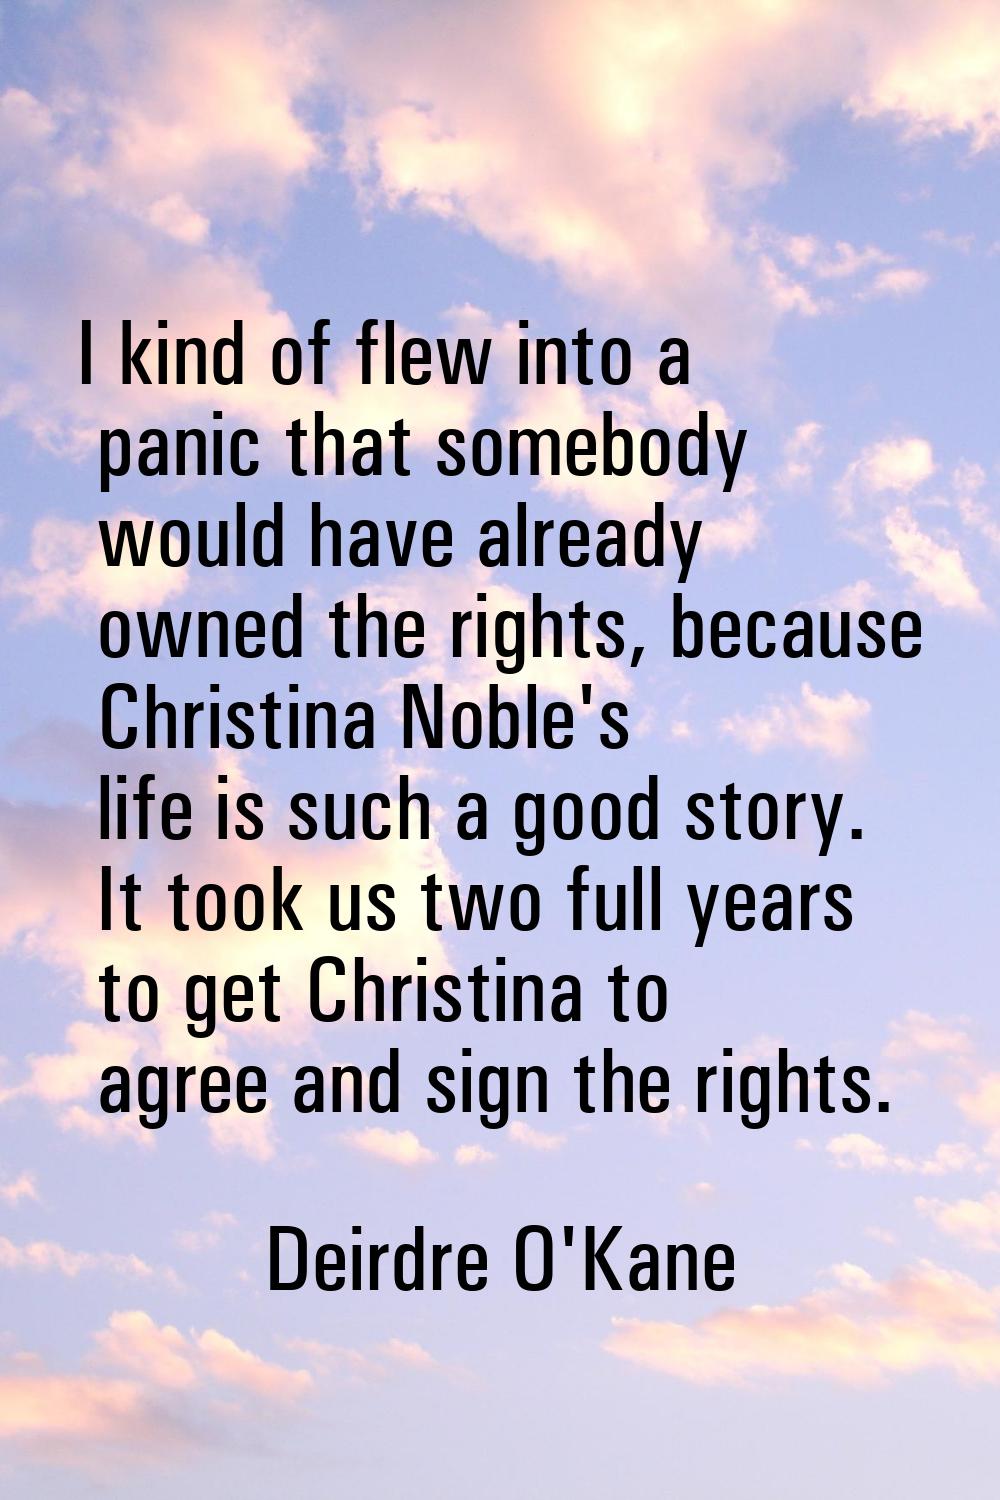 I kind of flew into a panic that somebody would have already owned the rights, because Christina No